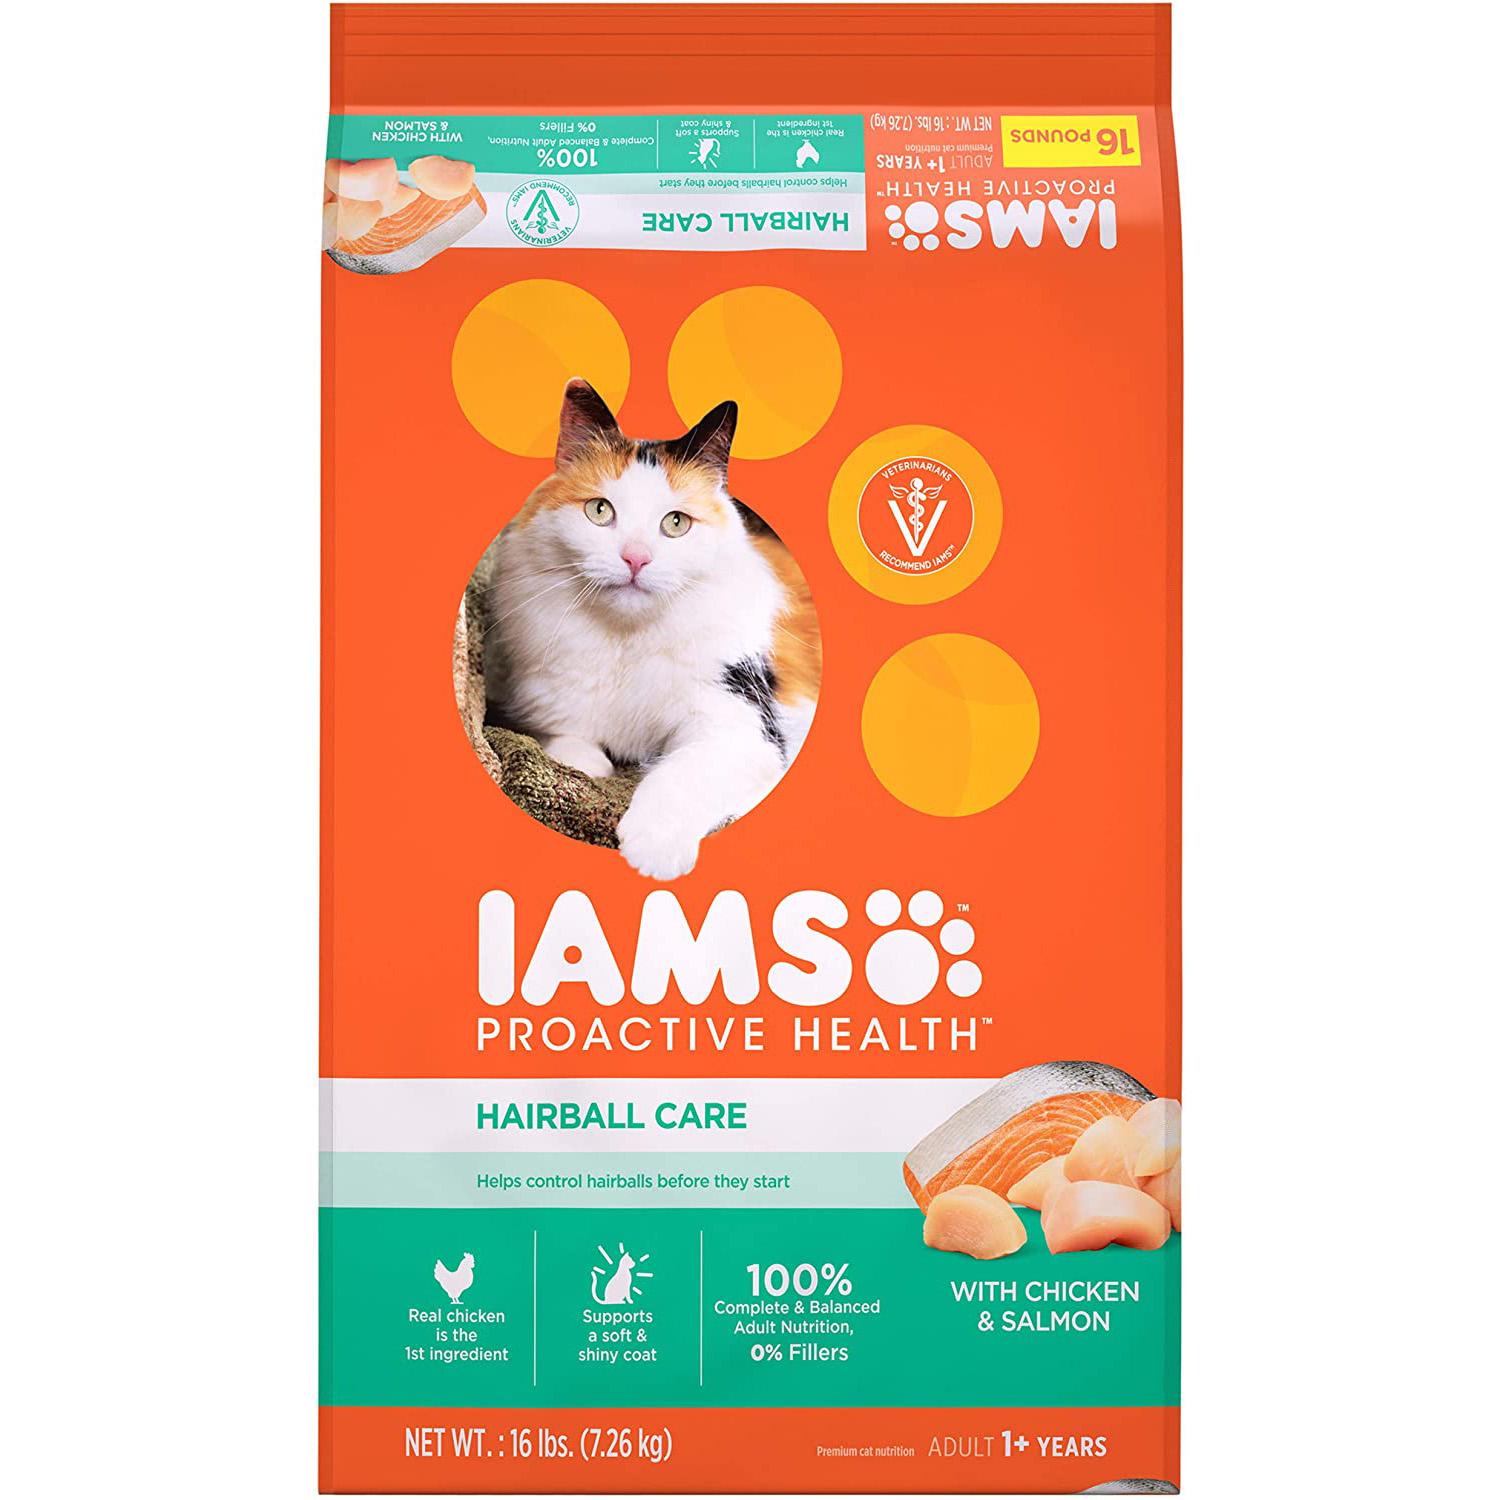 Iams ProActive Hairball Control Adult Dry Cat Food for 13.86 Shipped